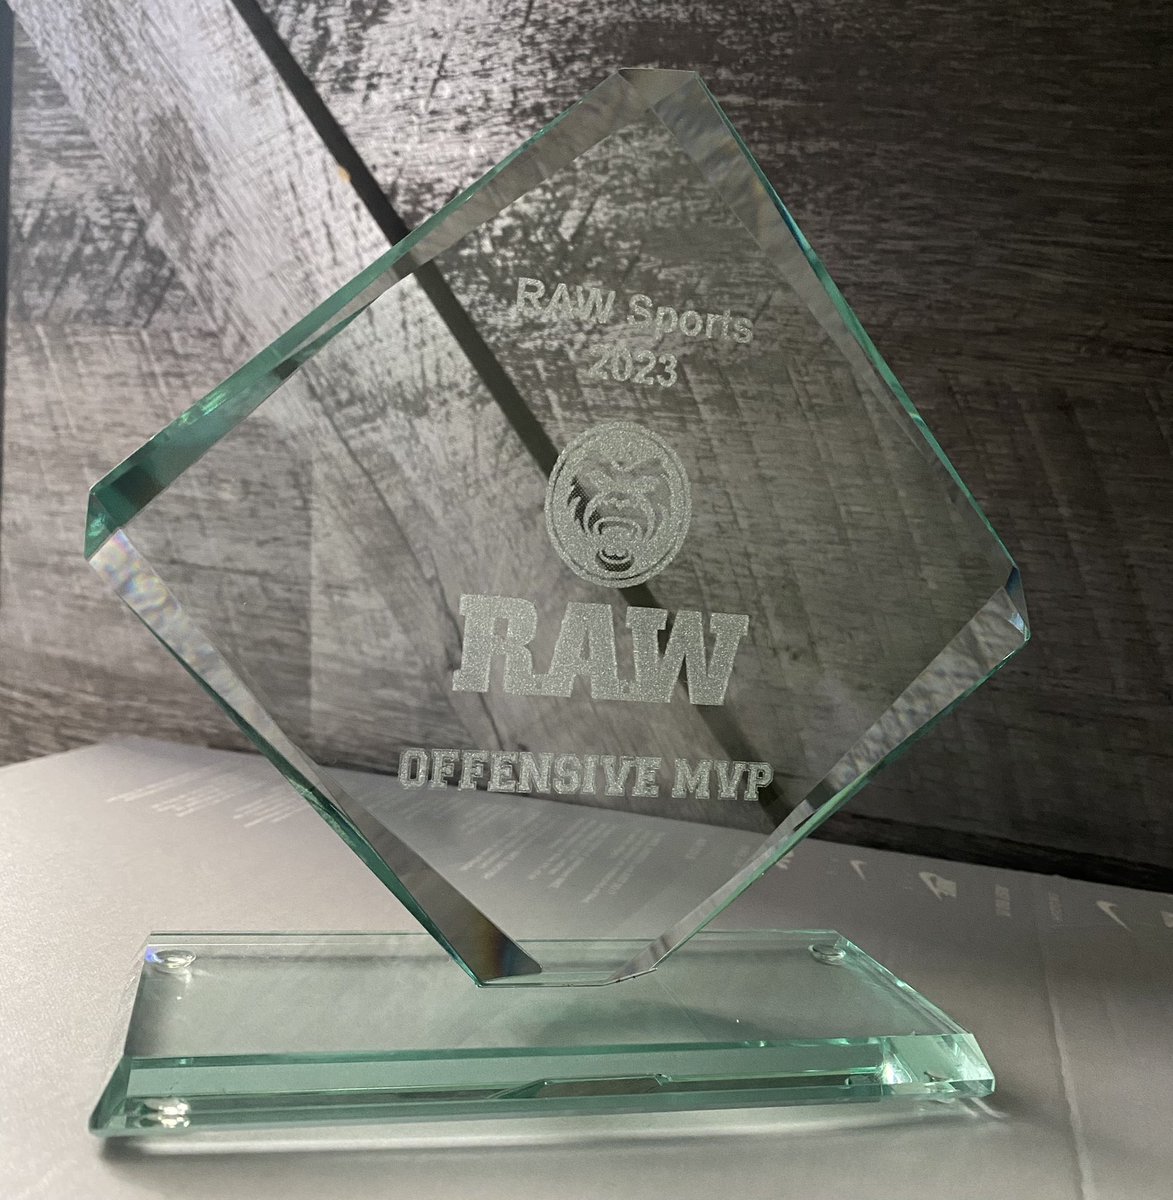 Very blessed to attend the @rawsportsyyc camp this week and be awarded with Offensive MVP.